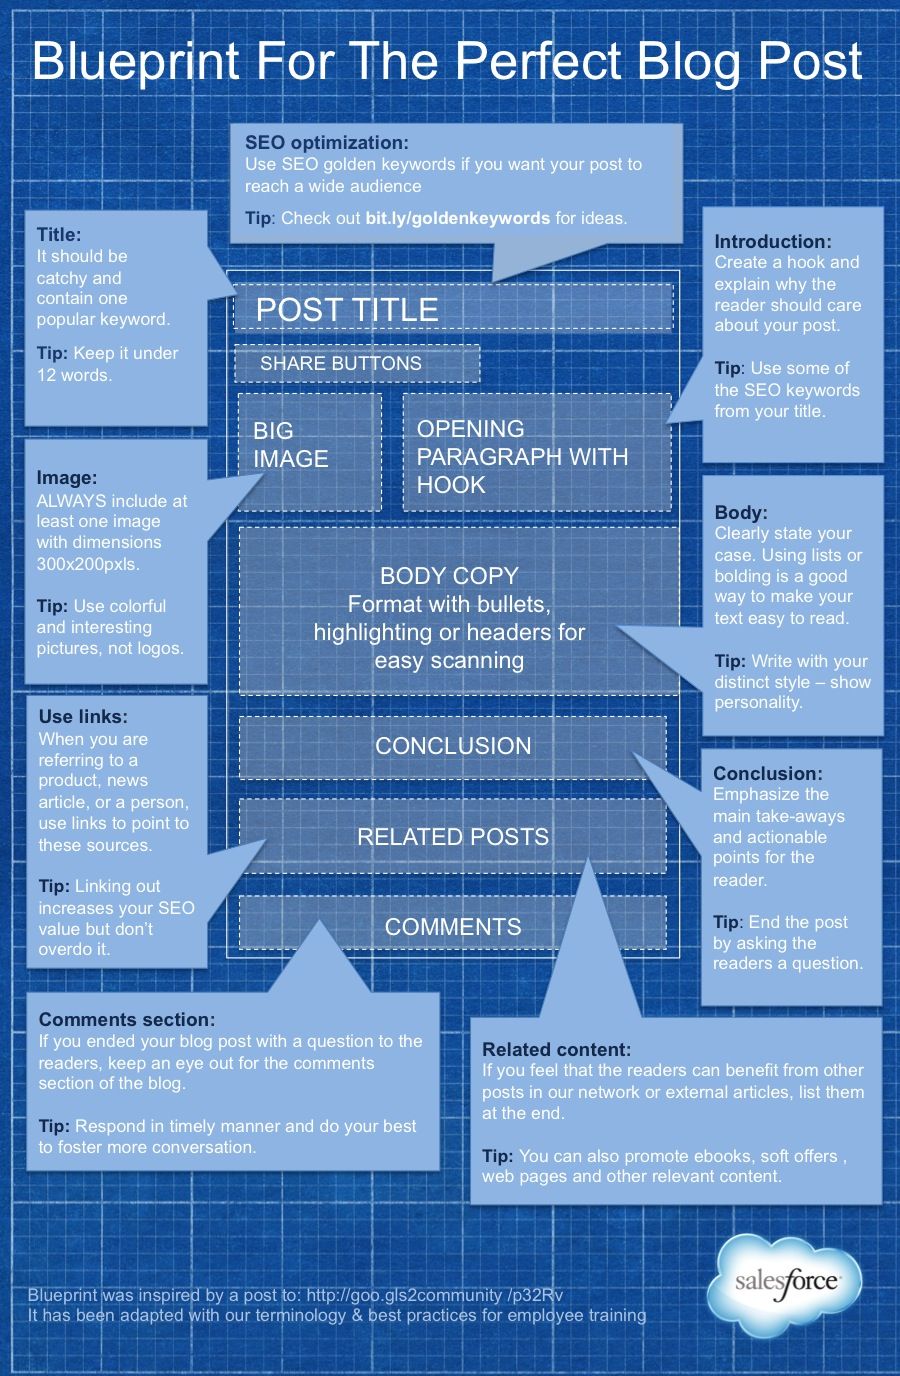 Interesting Infographics: Blueprint for The Perfect Blog Post